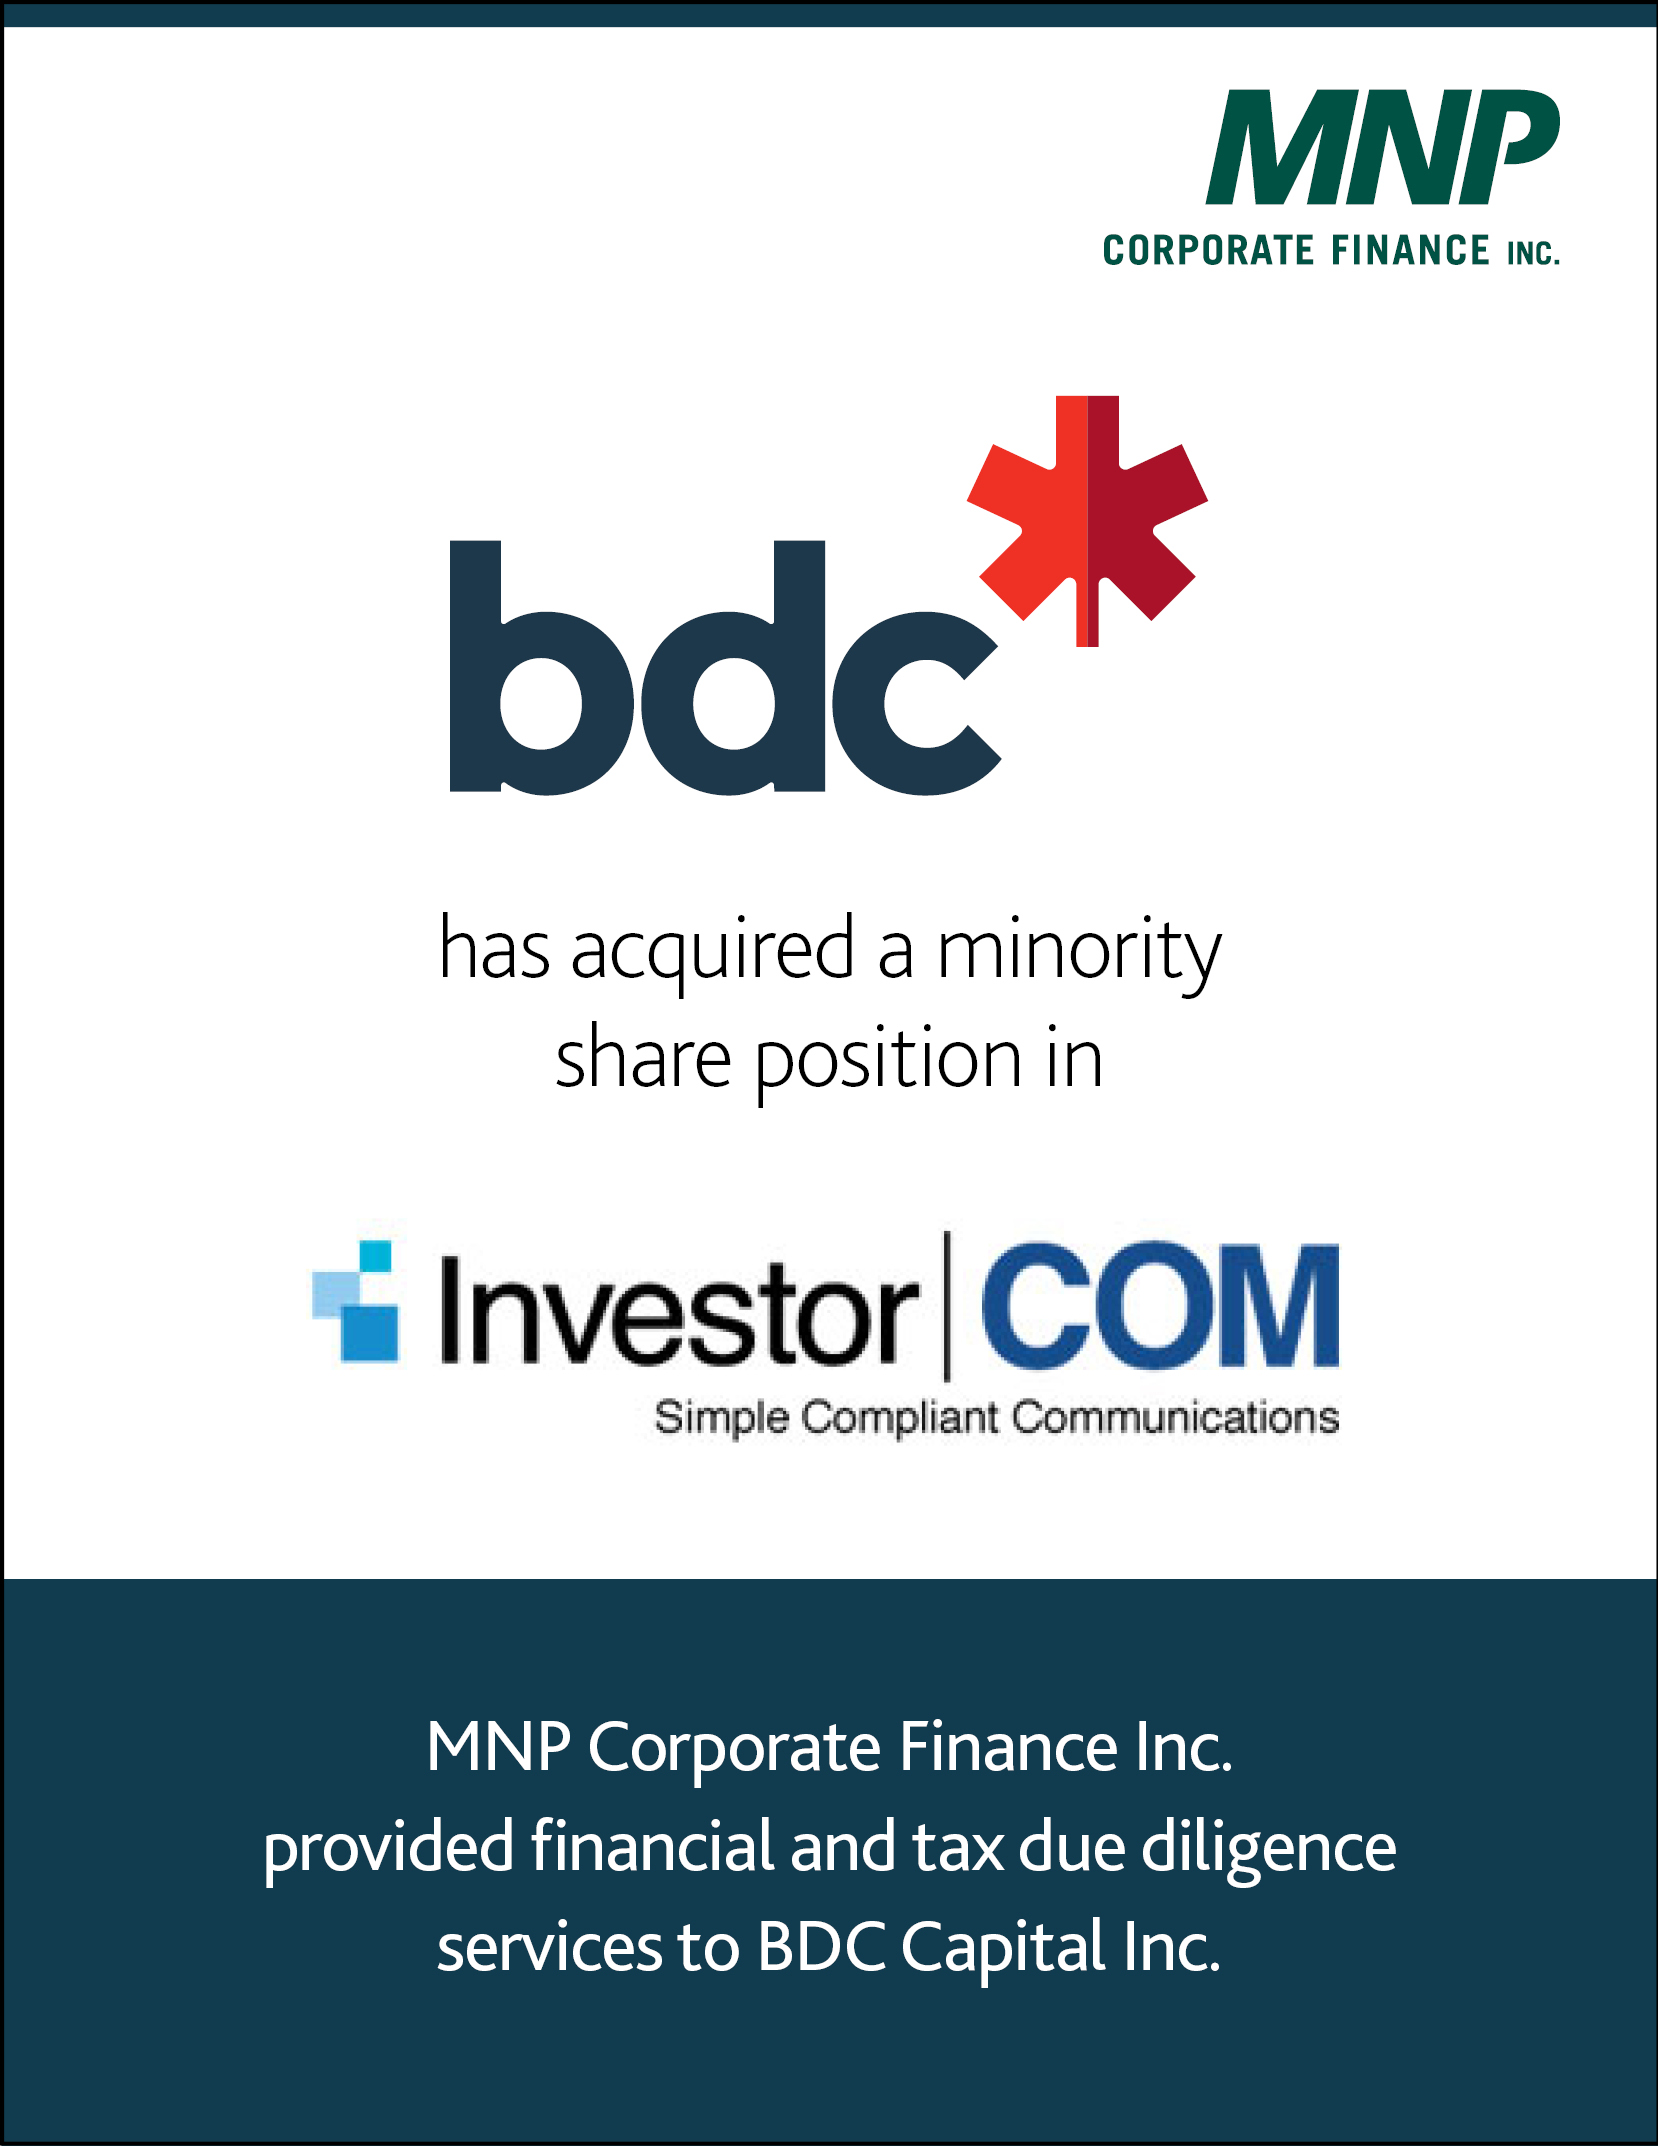 BDC Capital Inc. has acquired a minority share position in InvestorCOM Inc.